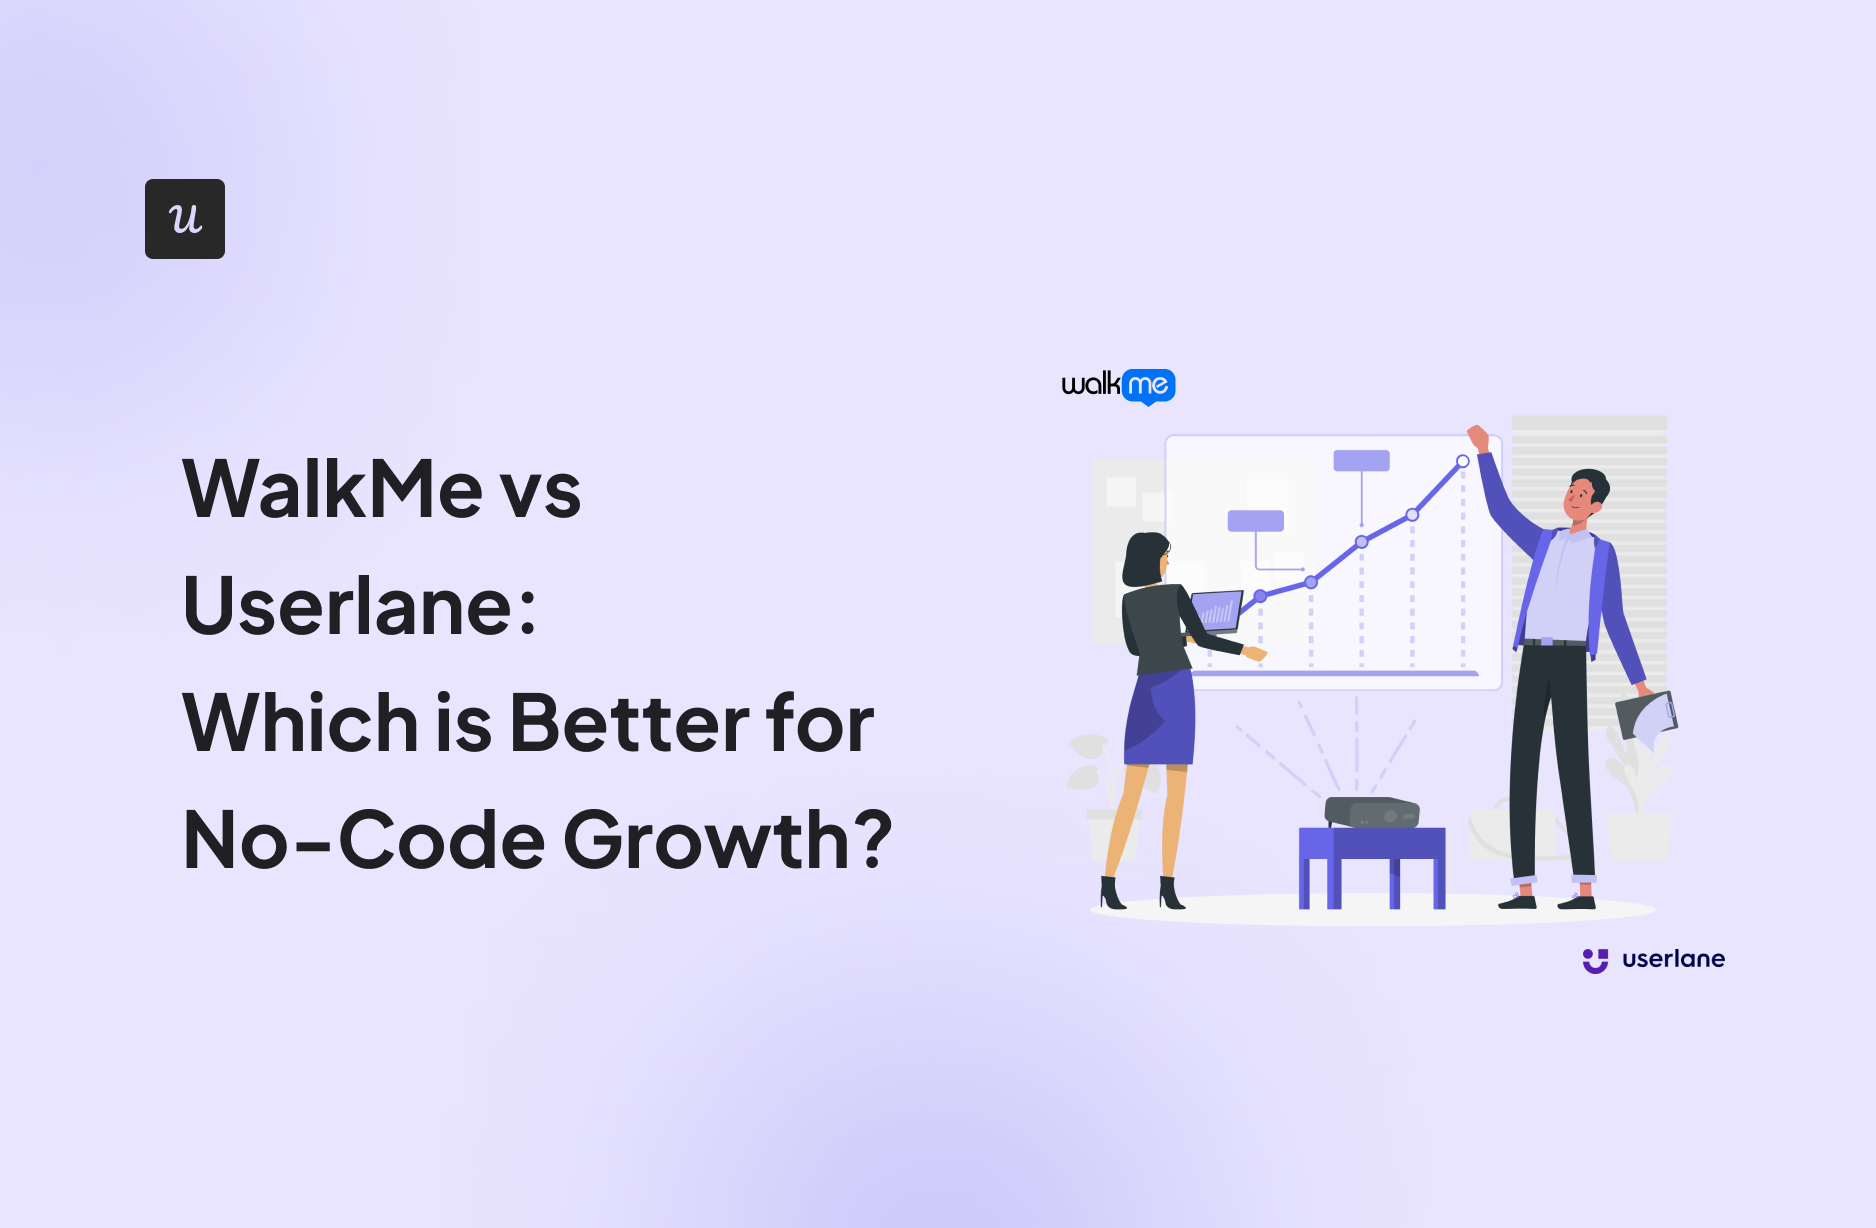 WalkMe vs Userlane: Which is Better for No-Code Growth?